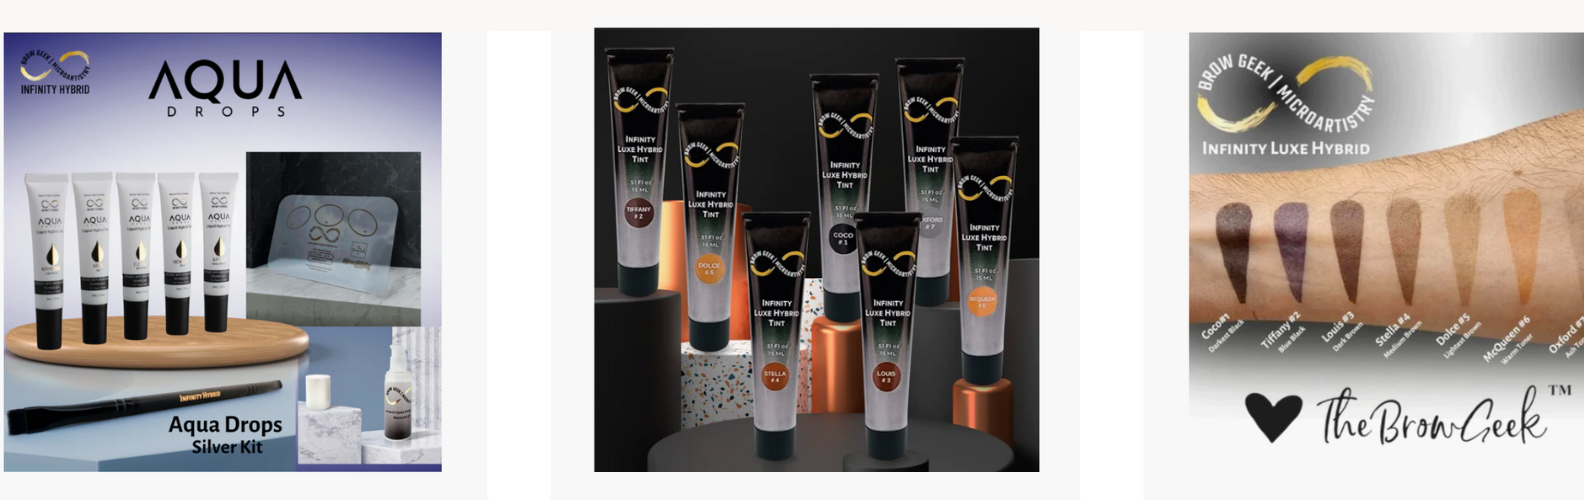 Three separate images and one featuring the Infinity hybrid brow tint and Aqua drops range. Showcasing the skin stain on a forearm.